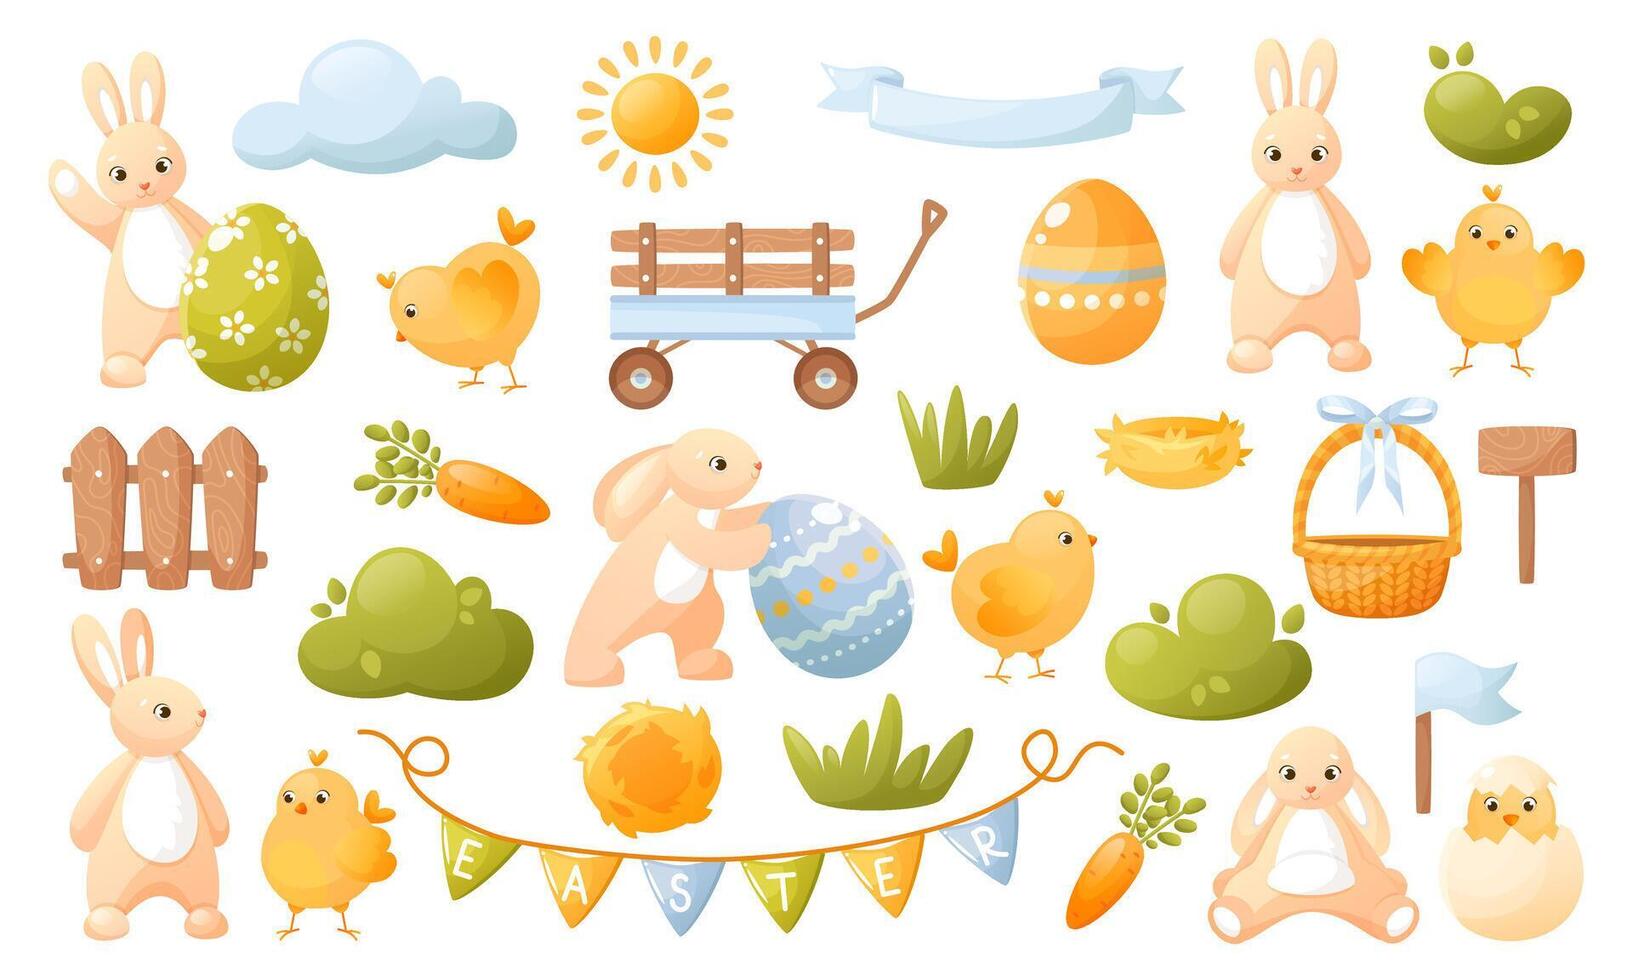 Large Easter set of elements for design. Egg hunt. Set with cute characters and festive decor. Eggs, rabbit, chick, spring bushes, grass, sun and clouds, basket, holiday Easter decorations. vector